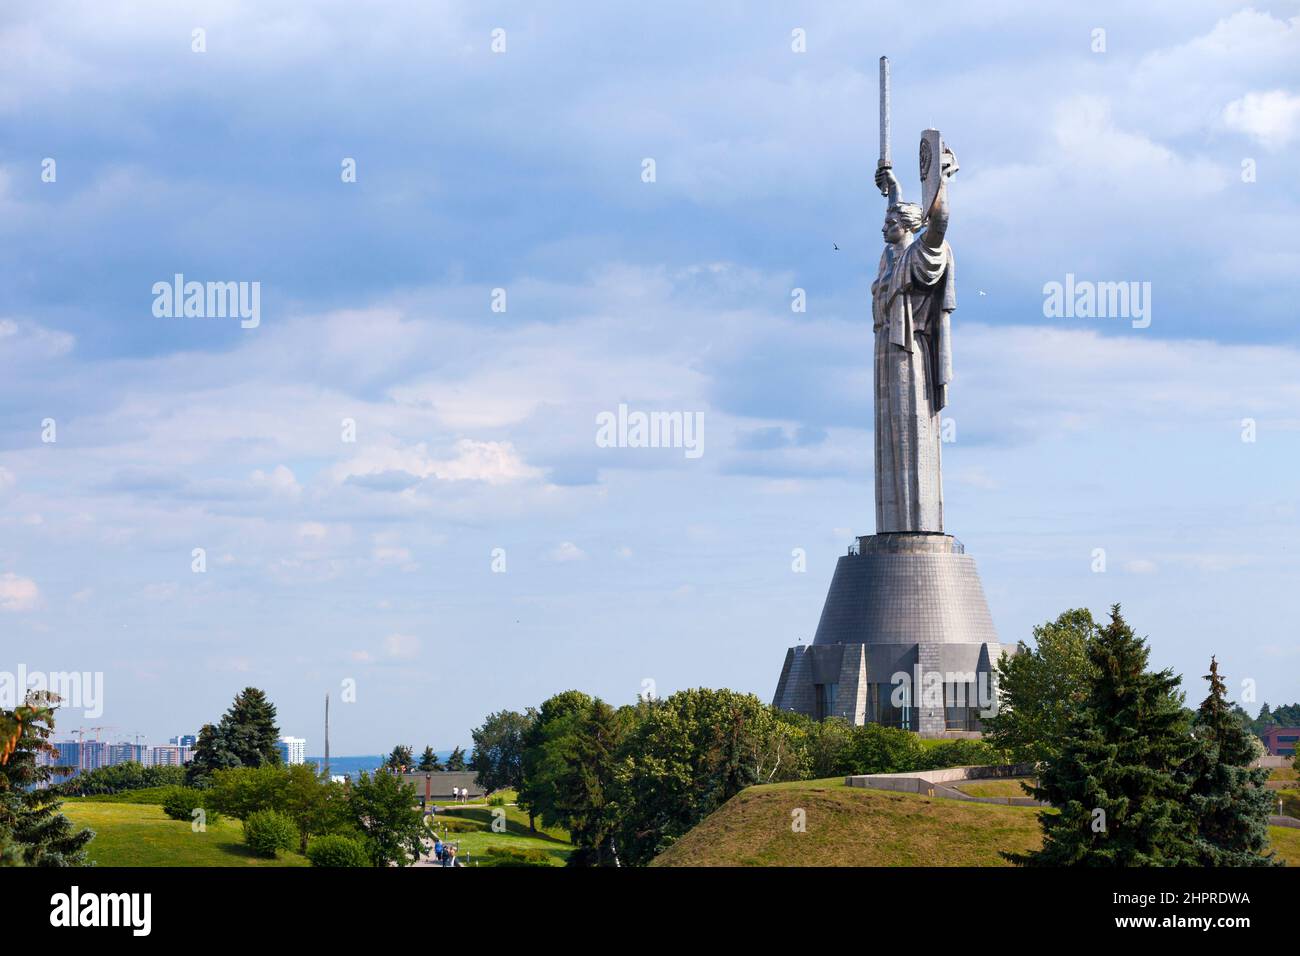 Kiev, Ukraine - July 04 2018: The Motherland Monument is a 62 m (203 ft) tall monumental statue. Its overall structure measuring 102 m (335 ft) includ Stock Photo